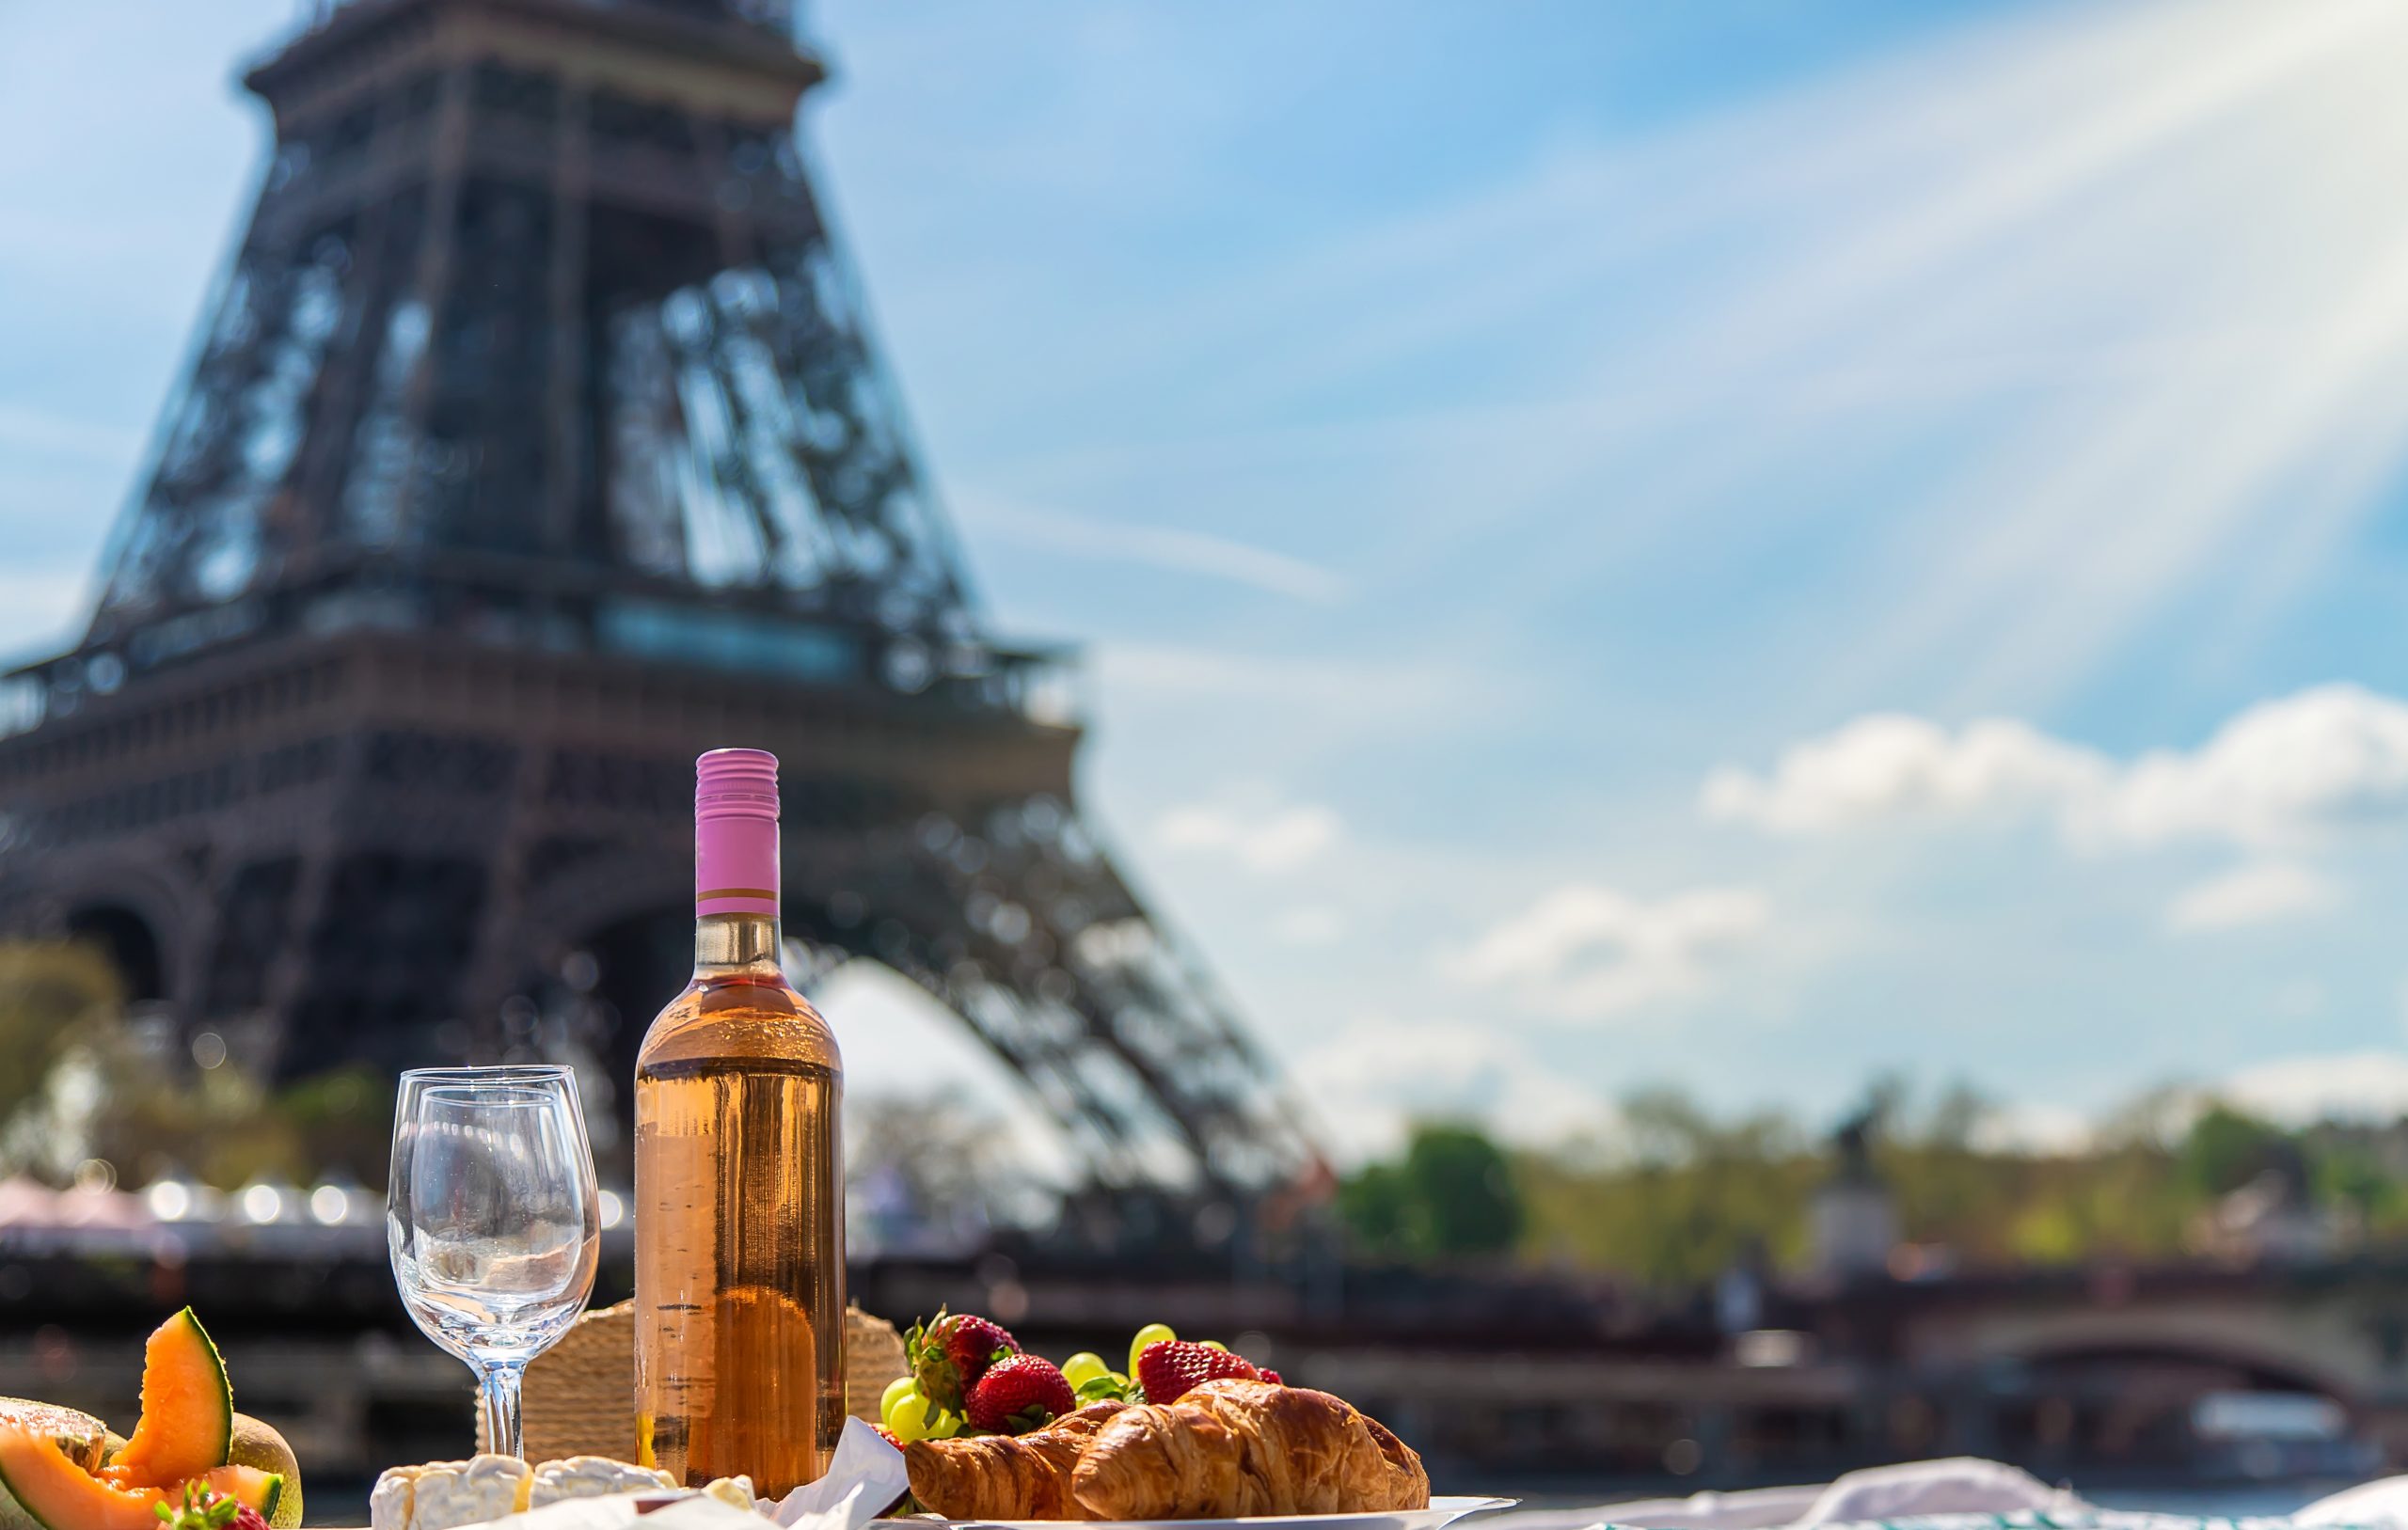 picnic with an Eiffel Tower view on a sunny day